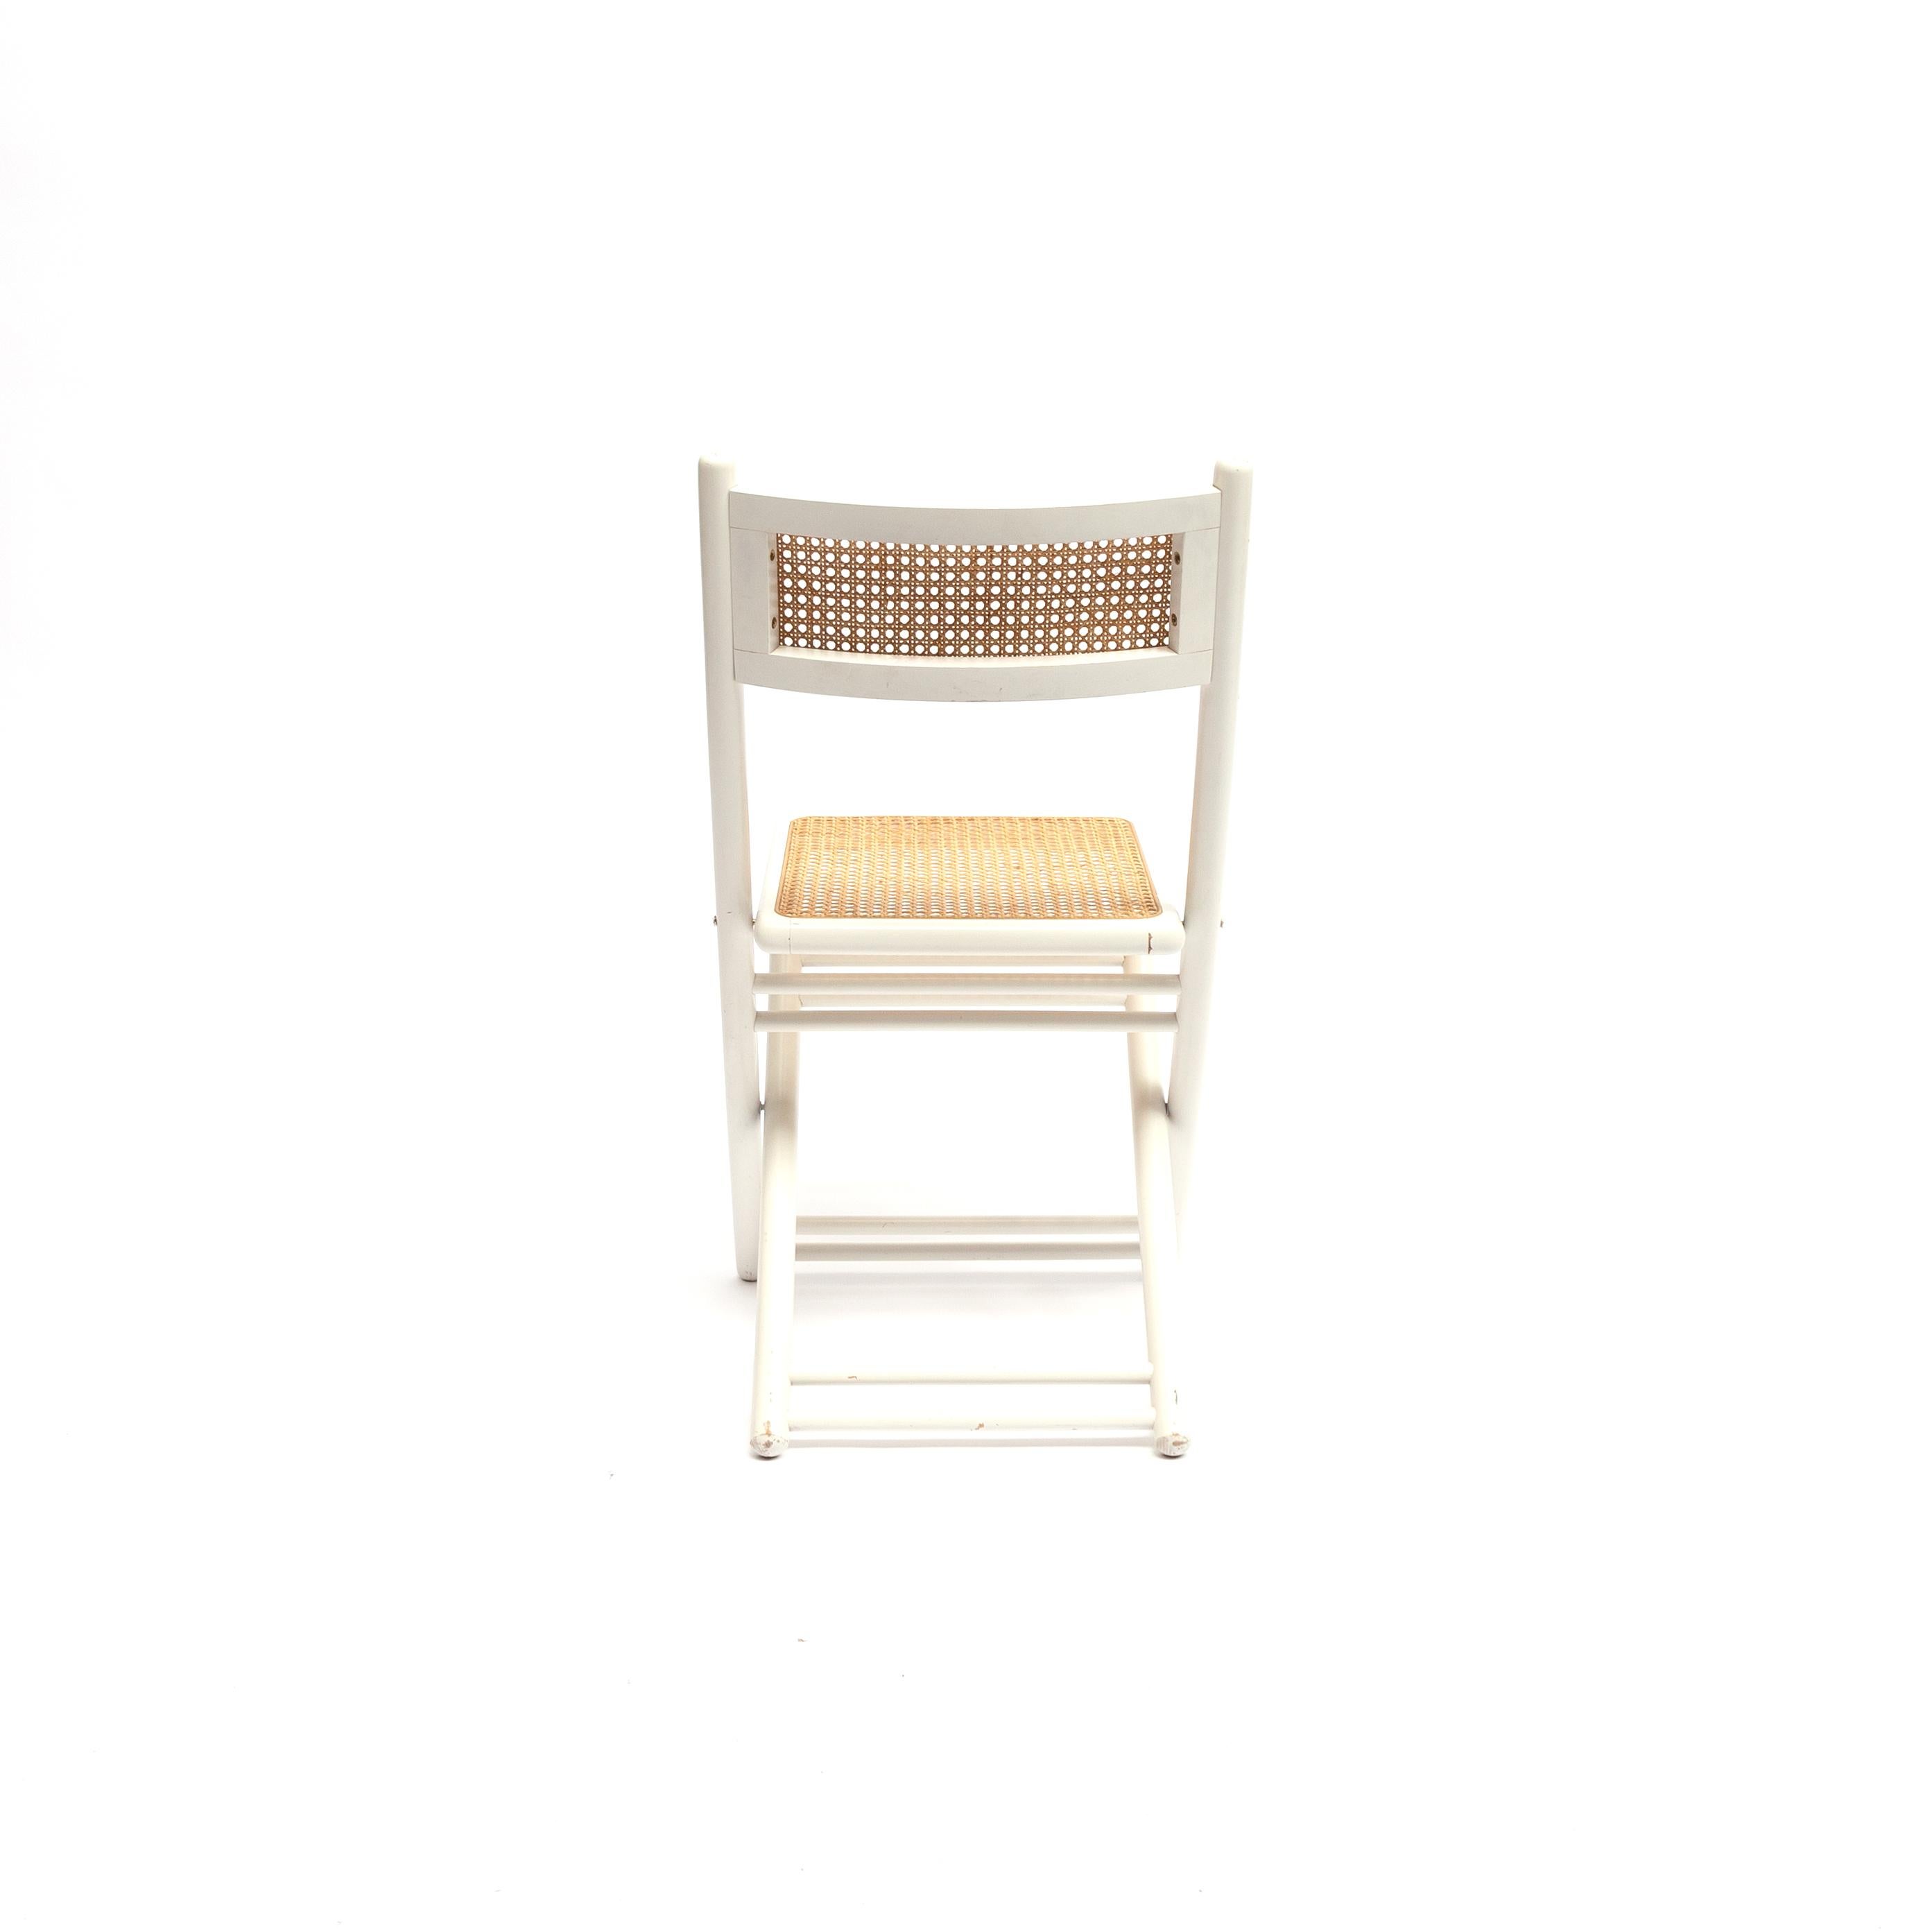 Original folding chair in white lacquered wood with webbing seat and backrest, in the typical Thonet style, circa 1960s-1970s. Original and ready to use condition.
 